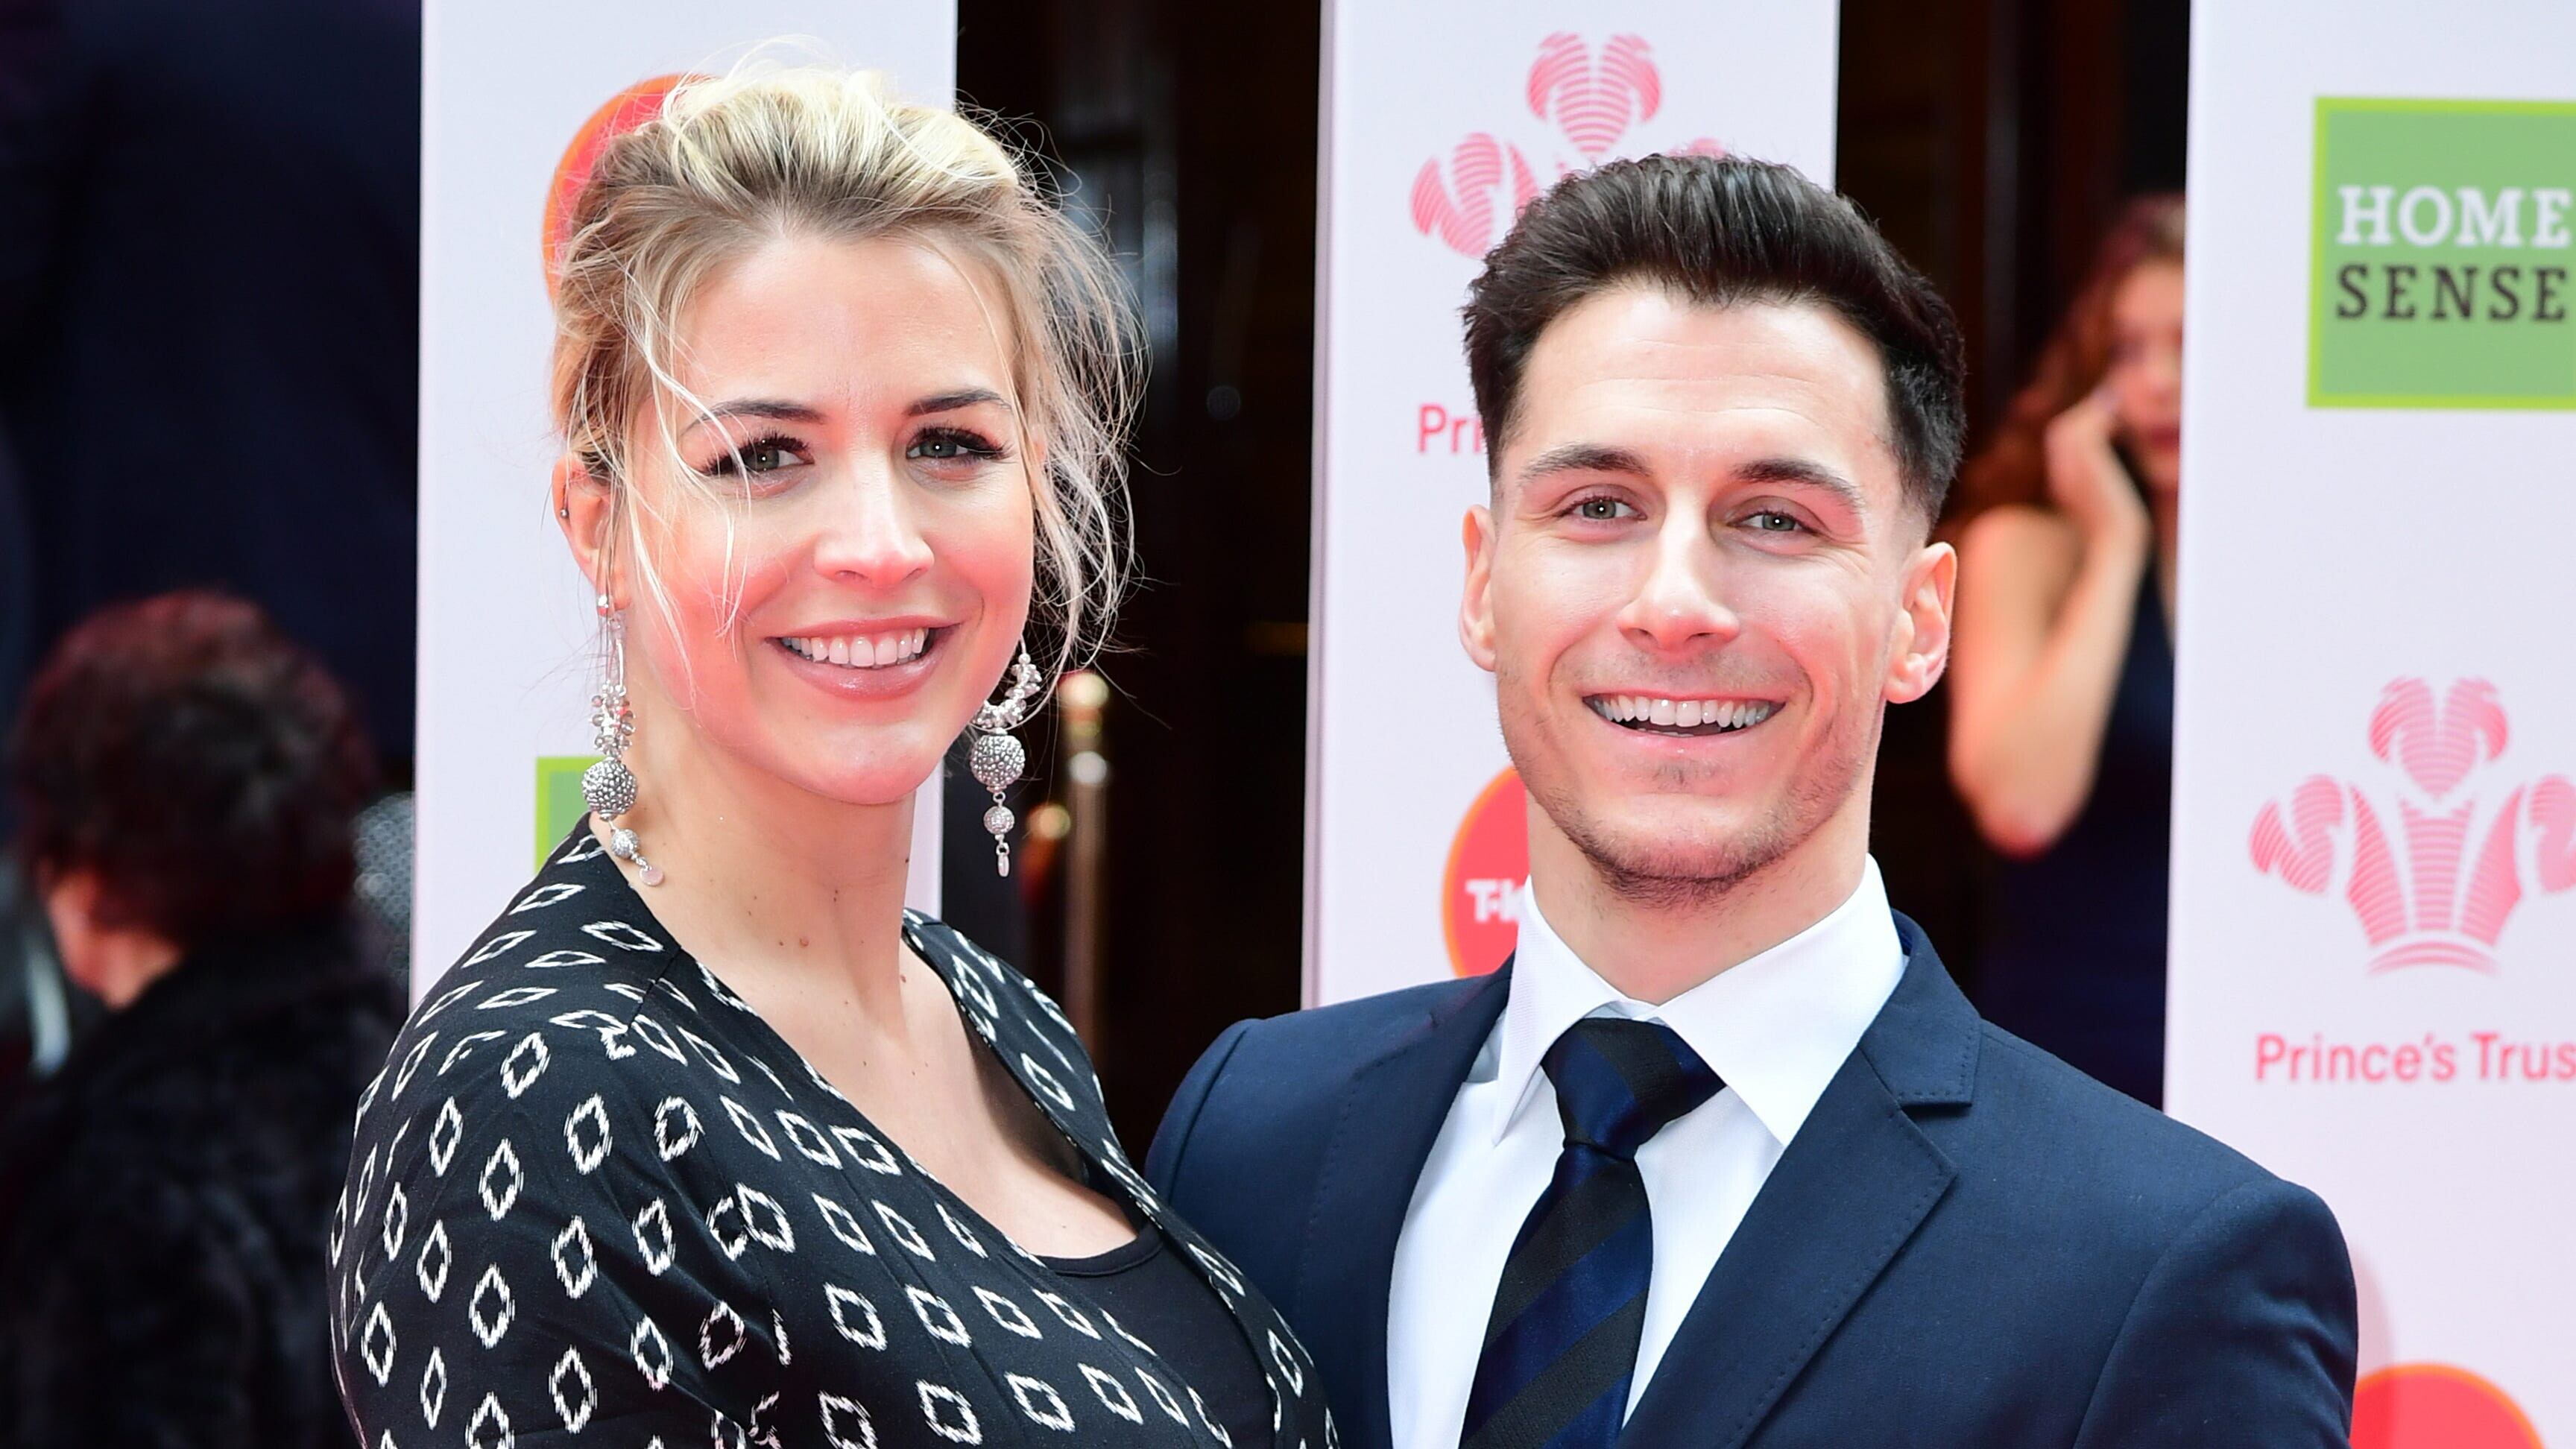 Gemma Atkinson and Gorka Marquez have welcomed a new addition to their family (Ian West/PA)